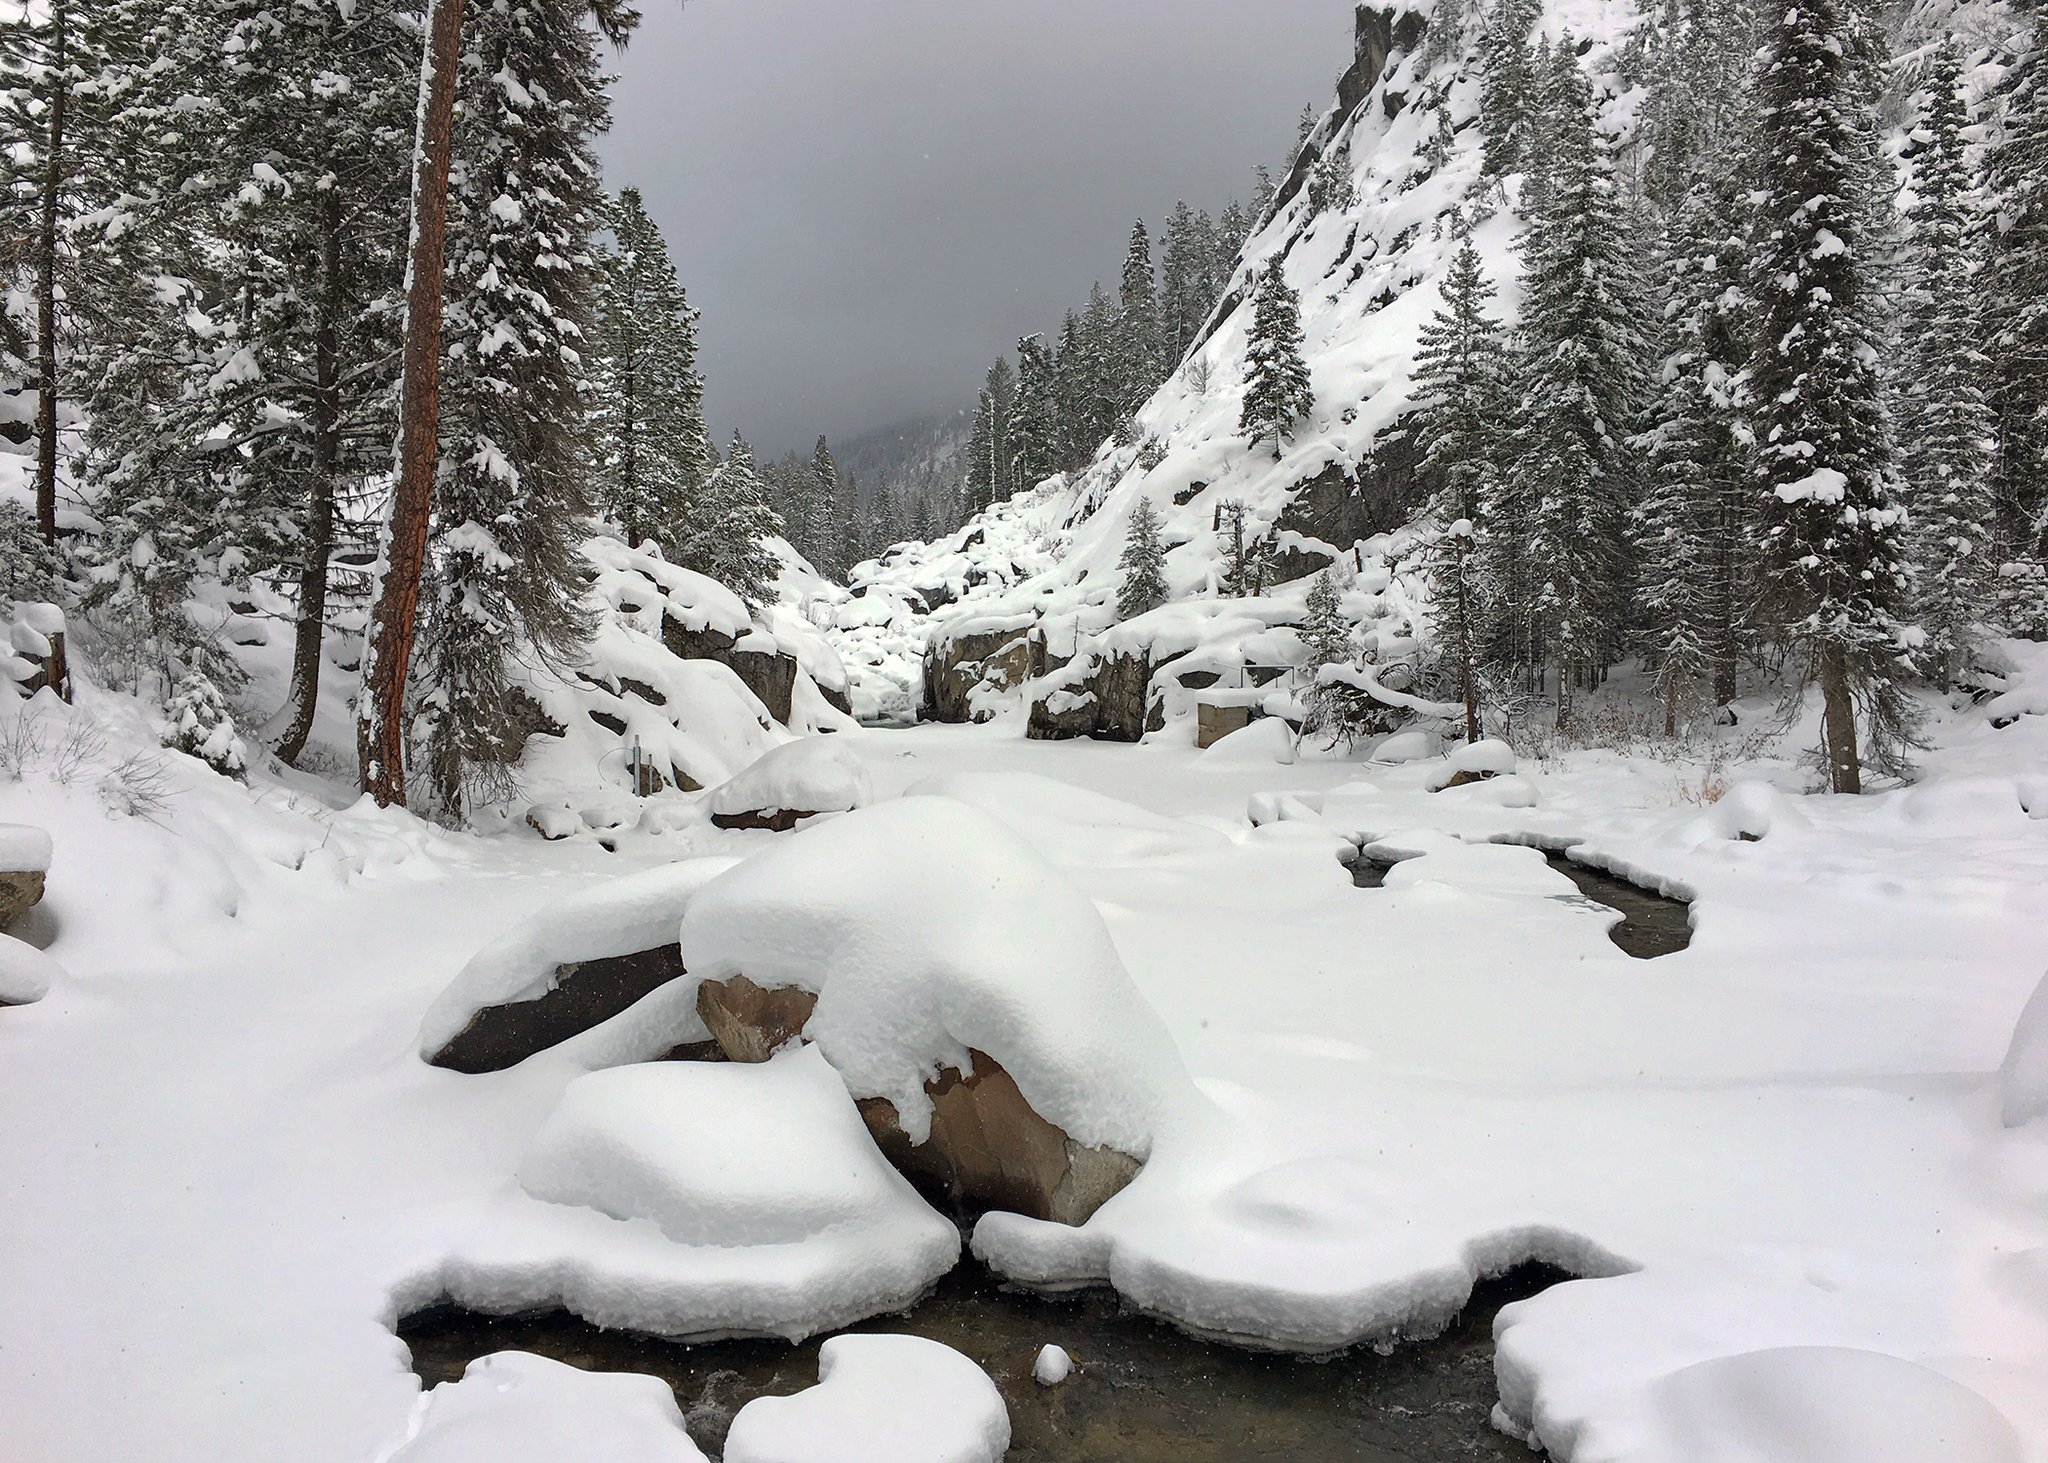 USGS in Idaho on X: Let it snow, let it snow, let it snow! Lake Fork  Payette River near McCall, #Idaho: t.cosCaQfbmE3t  #12GagesOfChristmas t.cocSAiks1NU0  X